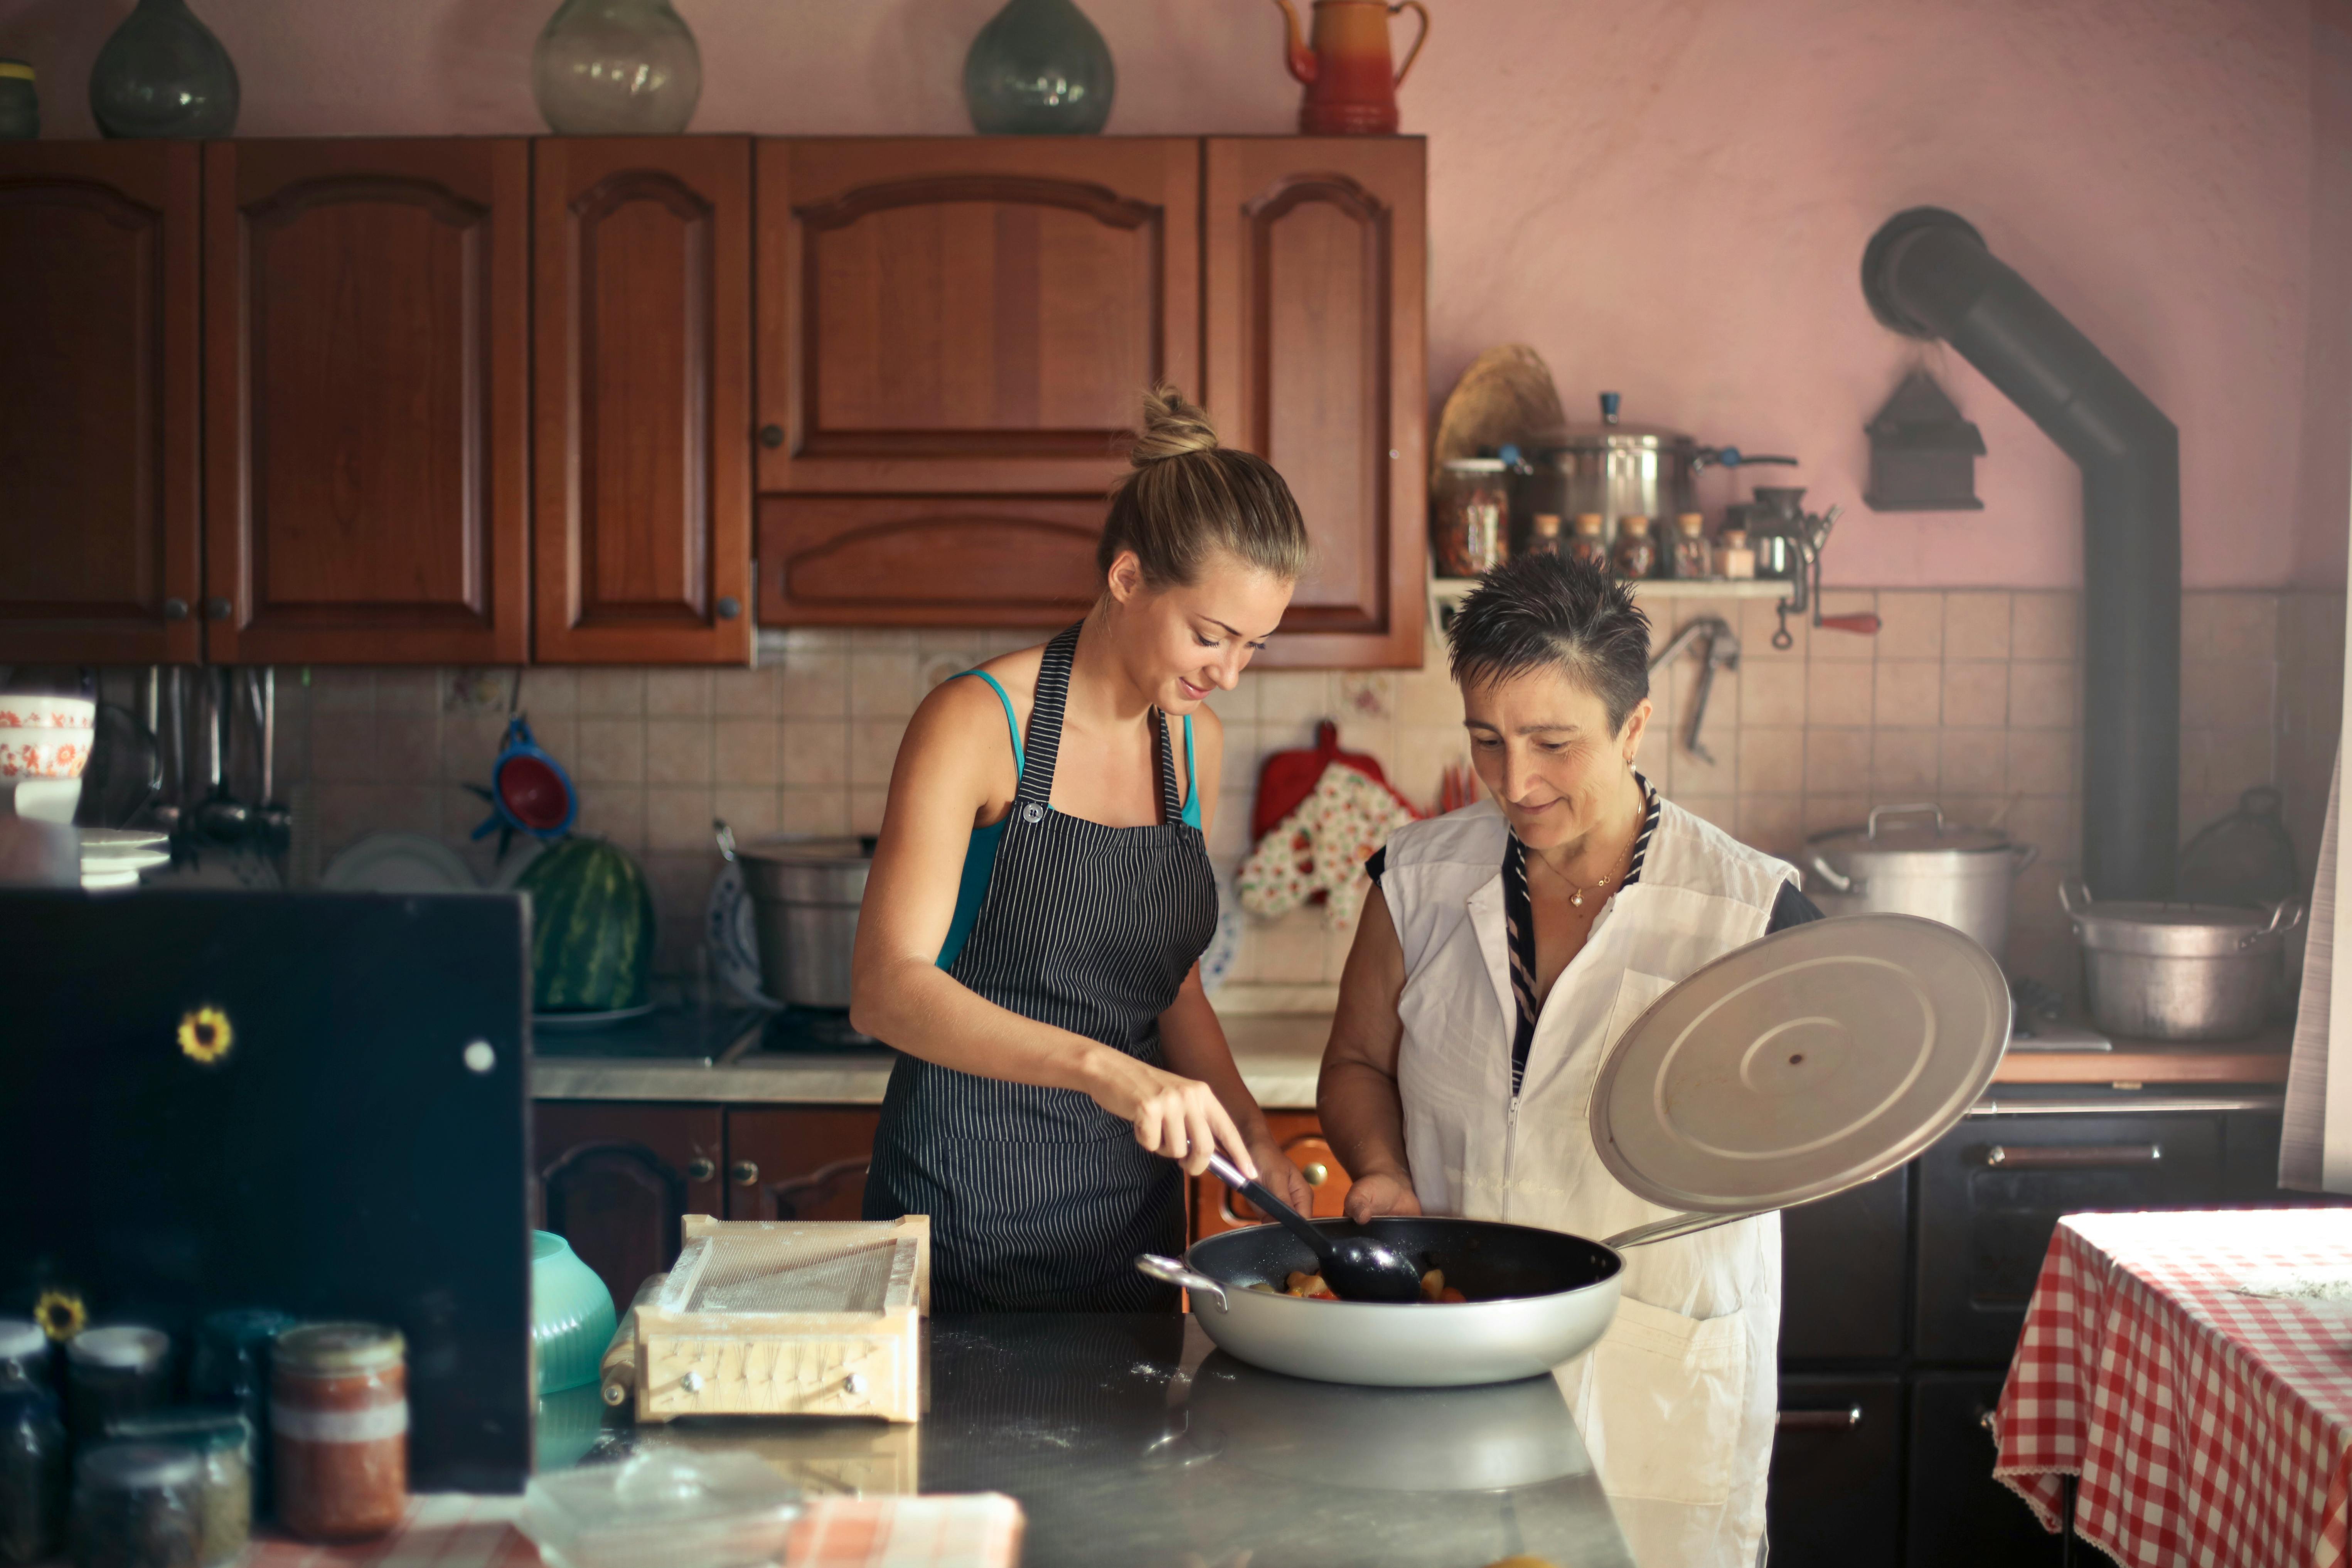 A happy younger woman and an older one working in the kitchen | Source: Pexels